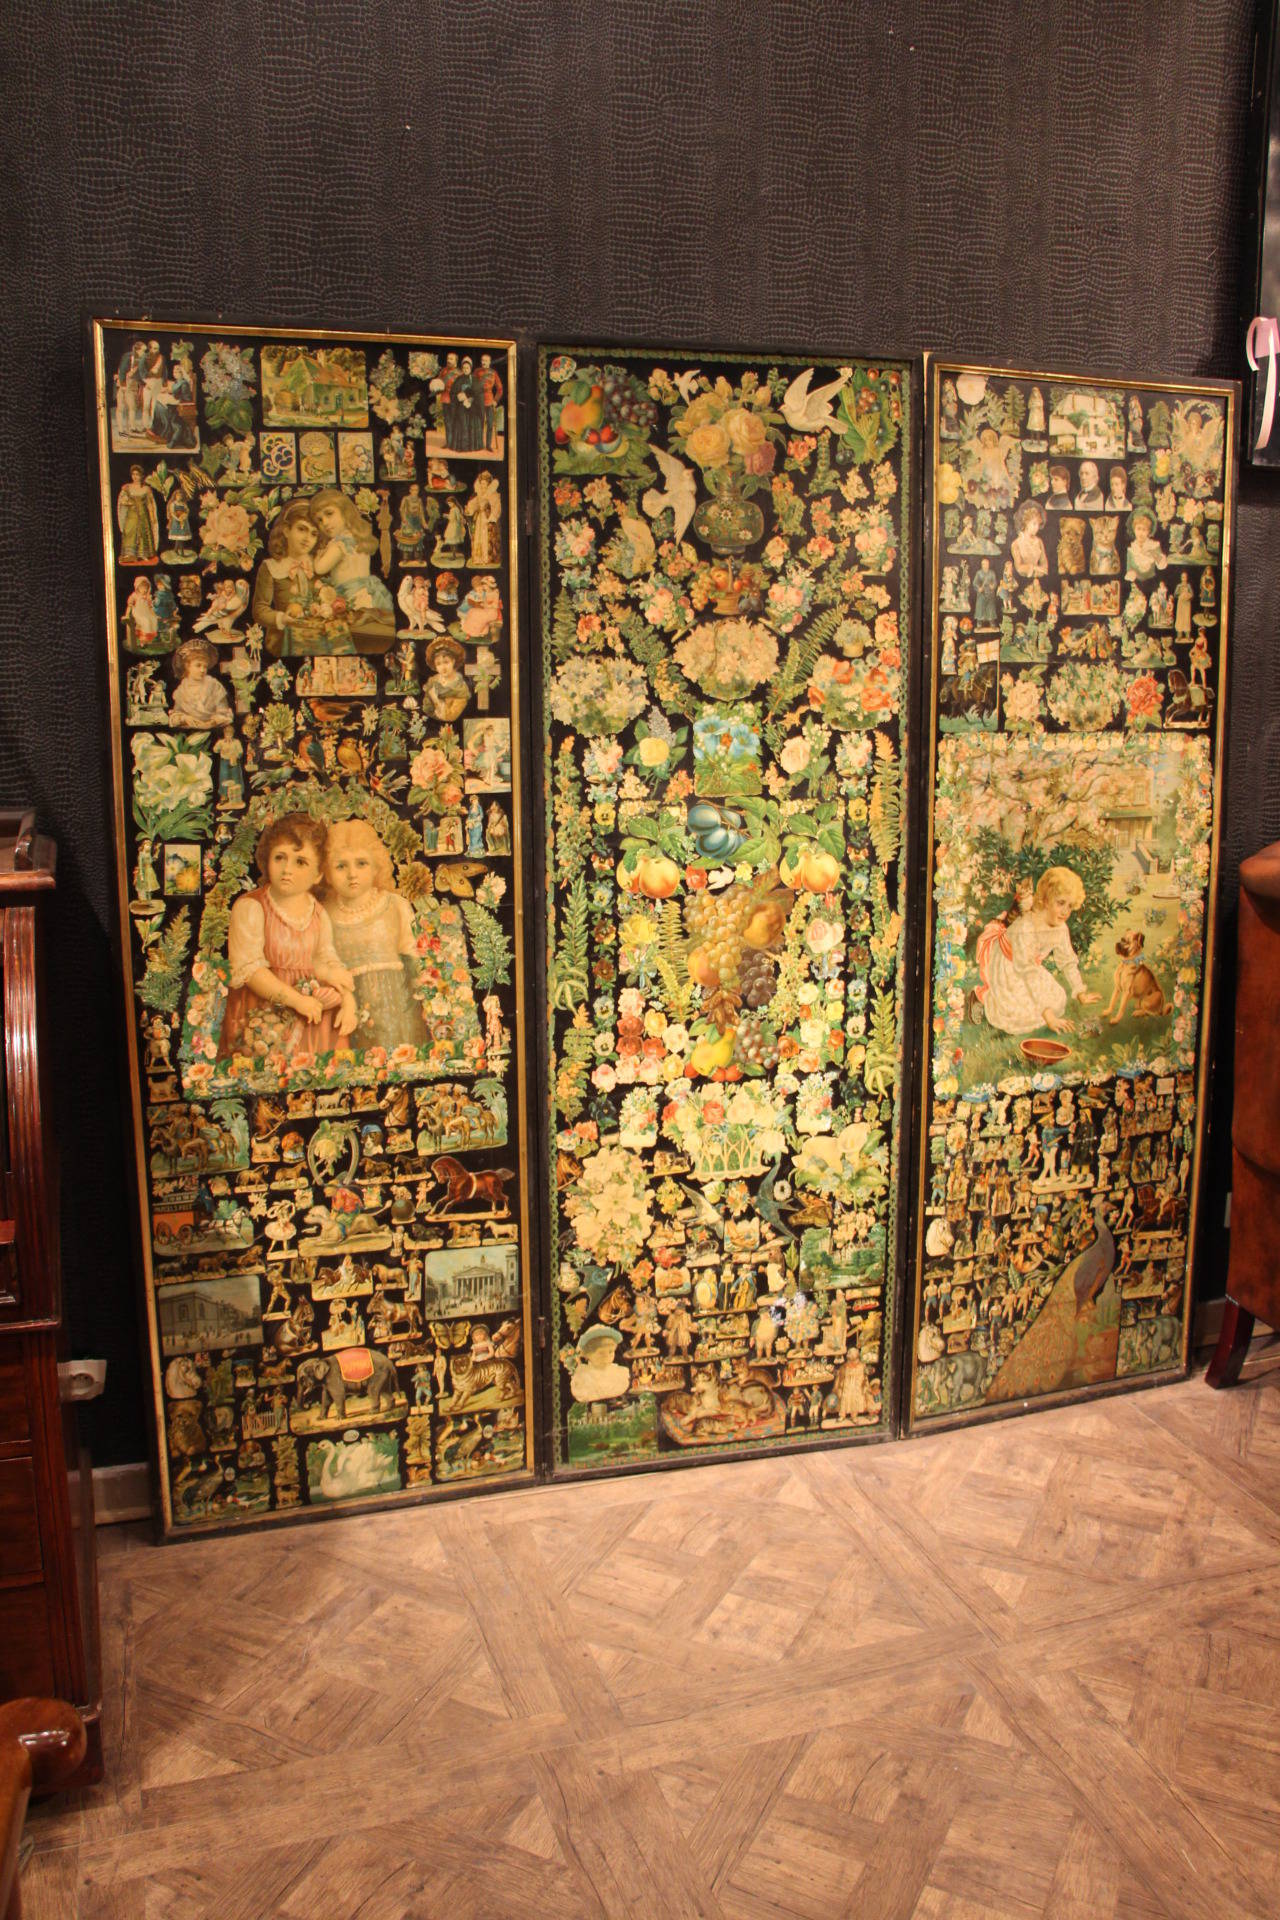 This beautiful screen is full of nice decoupage images put on canvas with a black wood frame.
It is decorated on both sides and is in pretty good condition.
It is very elegant because there are many images on a black base.